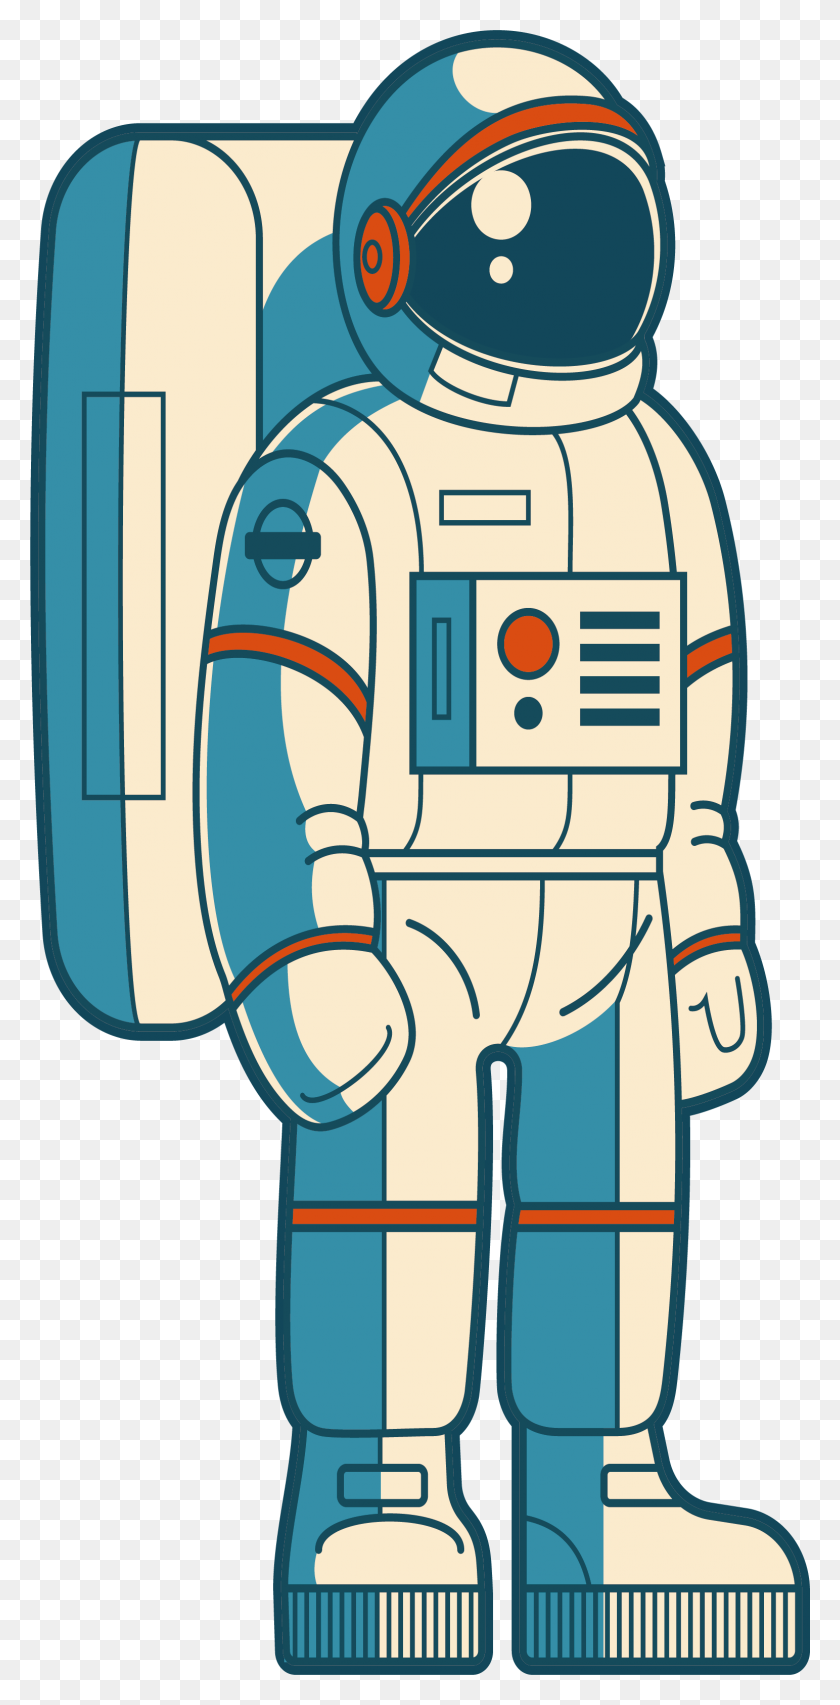 1543x3256 Png Images, Pngs, Astronaut, Astronauts - Astronaut PNG